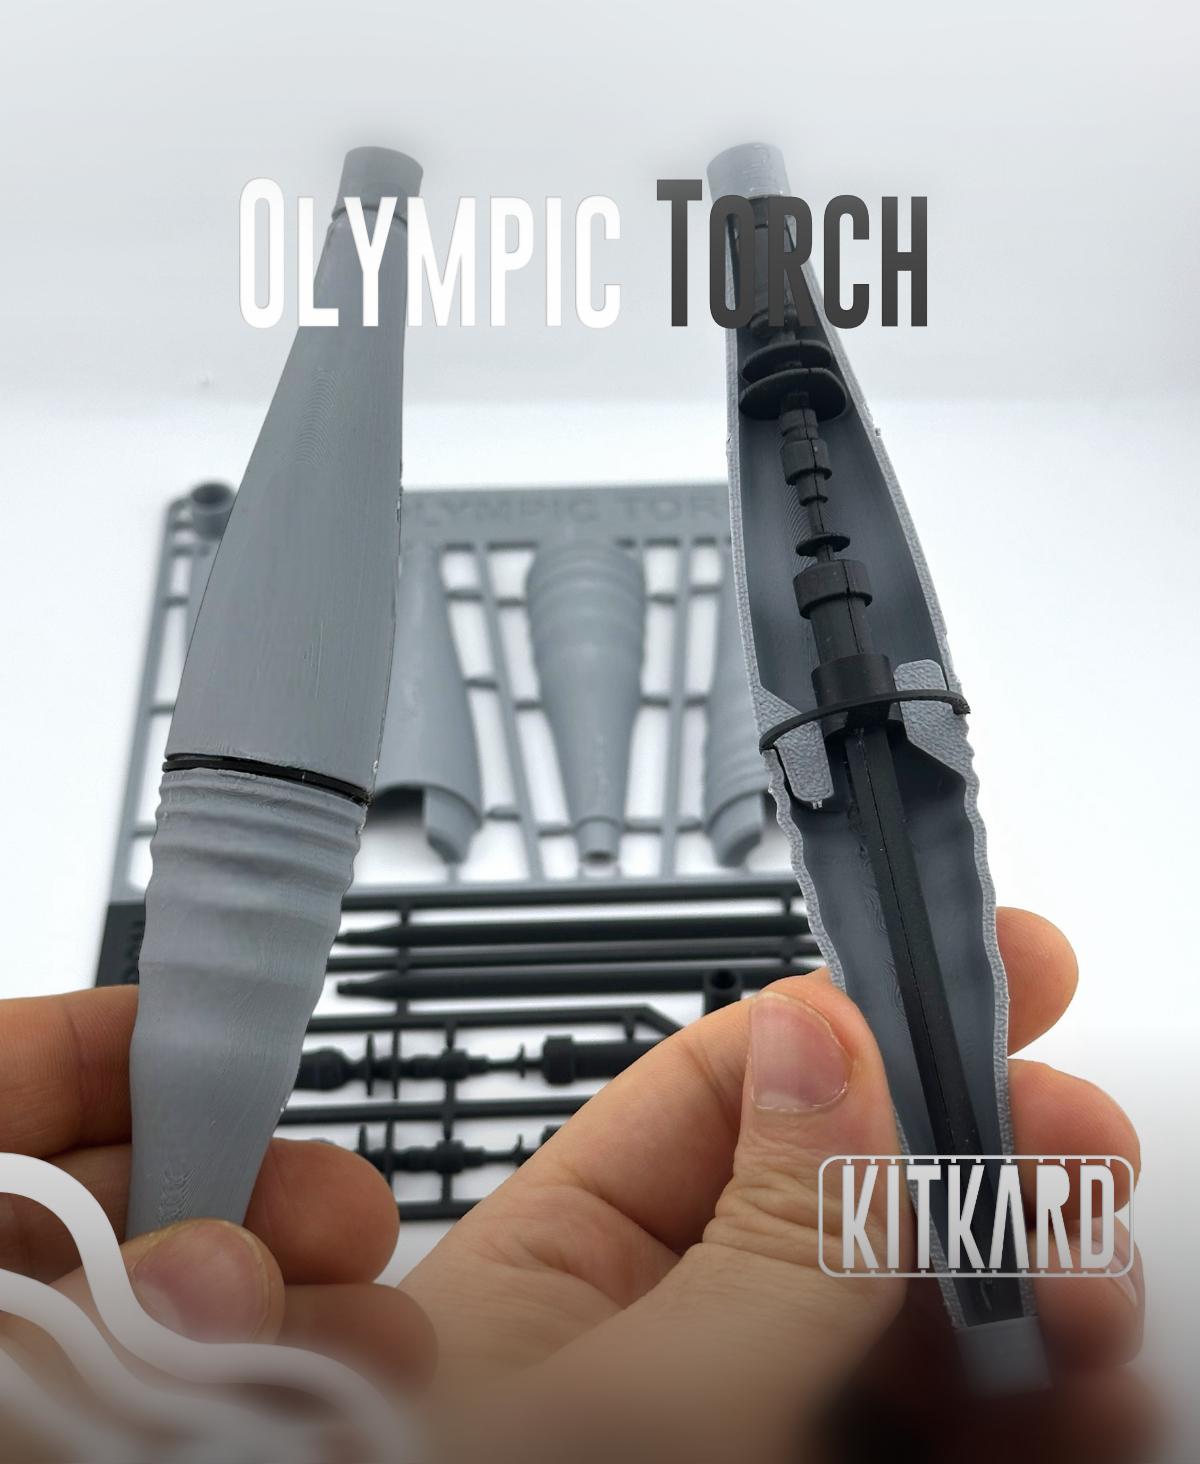 Olympic Torch Kit Card 3d model